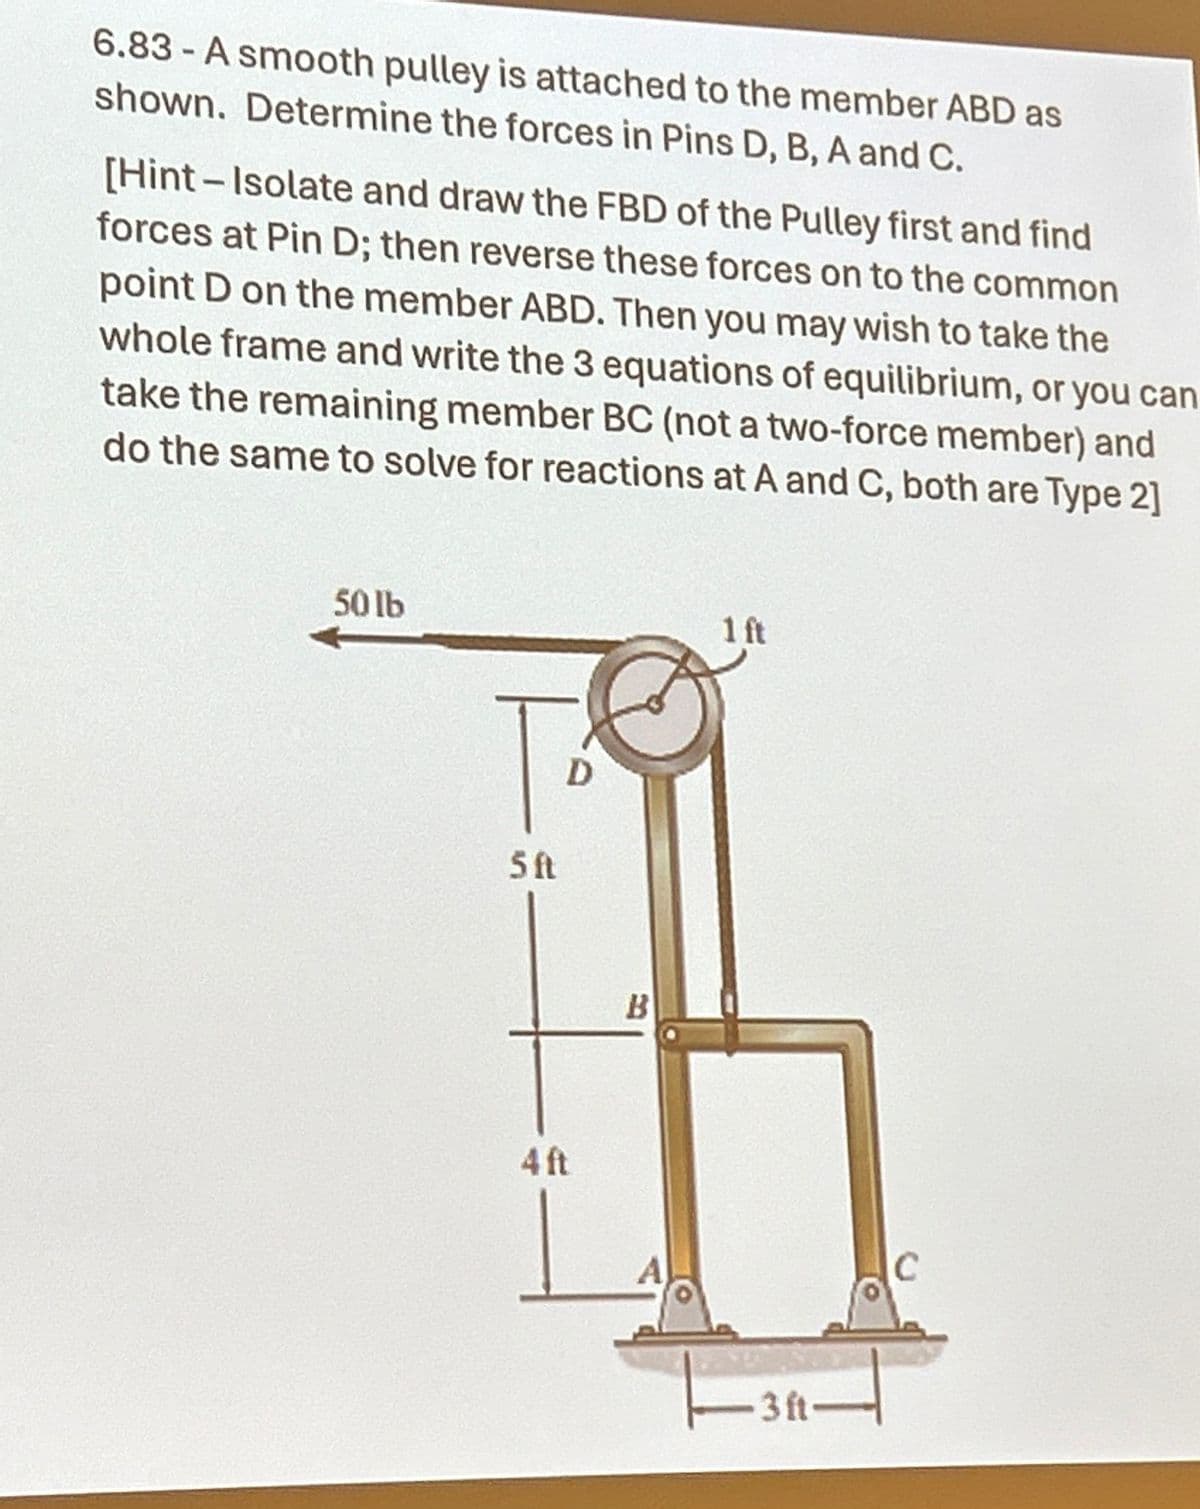 6.83-A smooth pulley is attached to the member ABD as
shown. Determine the forces in Pins D, B, A and C.
[Hint-Isolate and draw the FBD of the Pulley first and find
forces at Pin D; then reverse these forces on to the common
point D on the member ABD. Then you may wish to take the
whole frame and write the 3 equations of equilibrium, or you can
take the remaining member BC (not a two-force member) and
do the same to solve for reactions at A and C, both are Type 2]
50lb
5ft
4 ft
D
B
1 ft
3ft
C